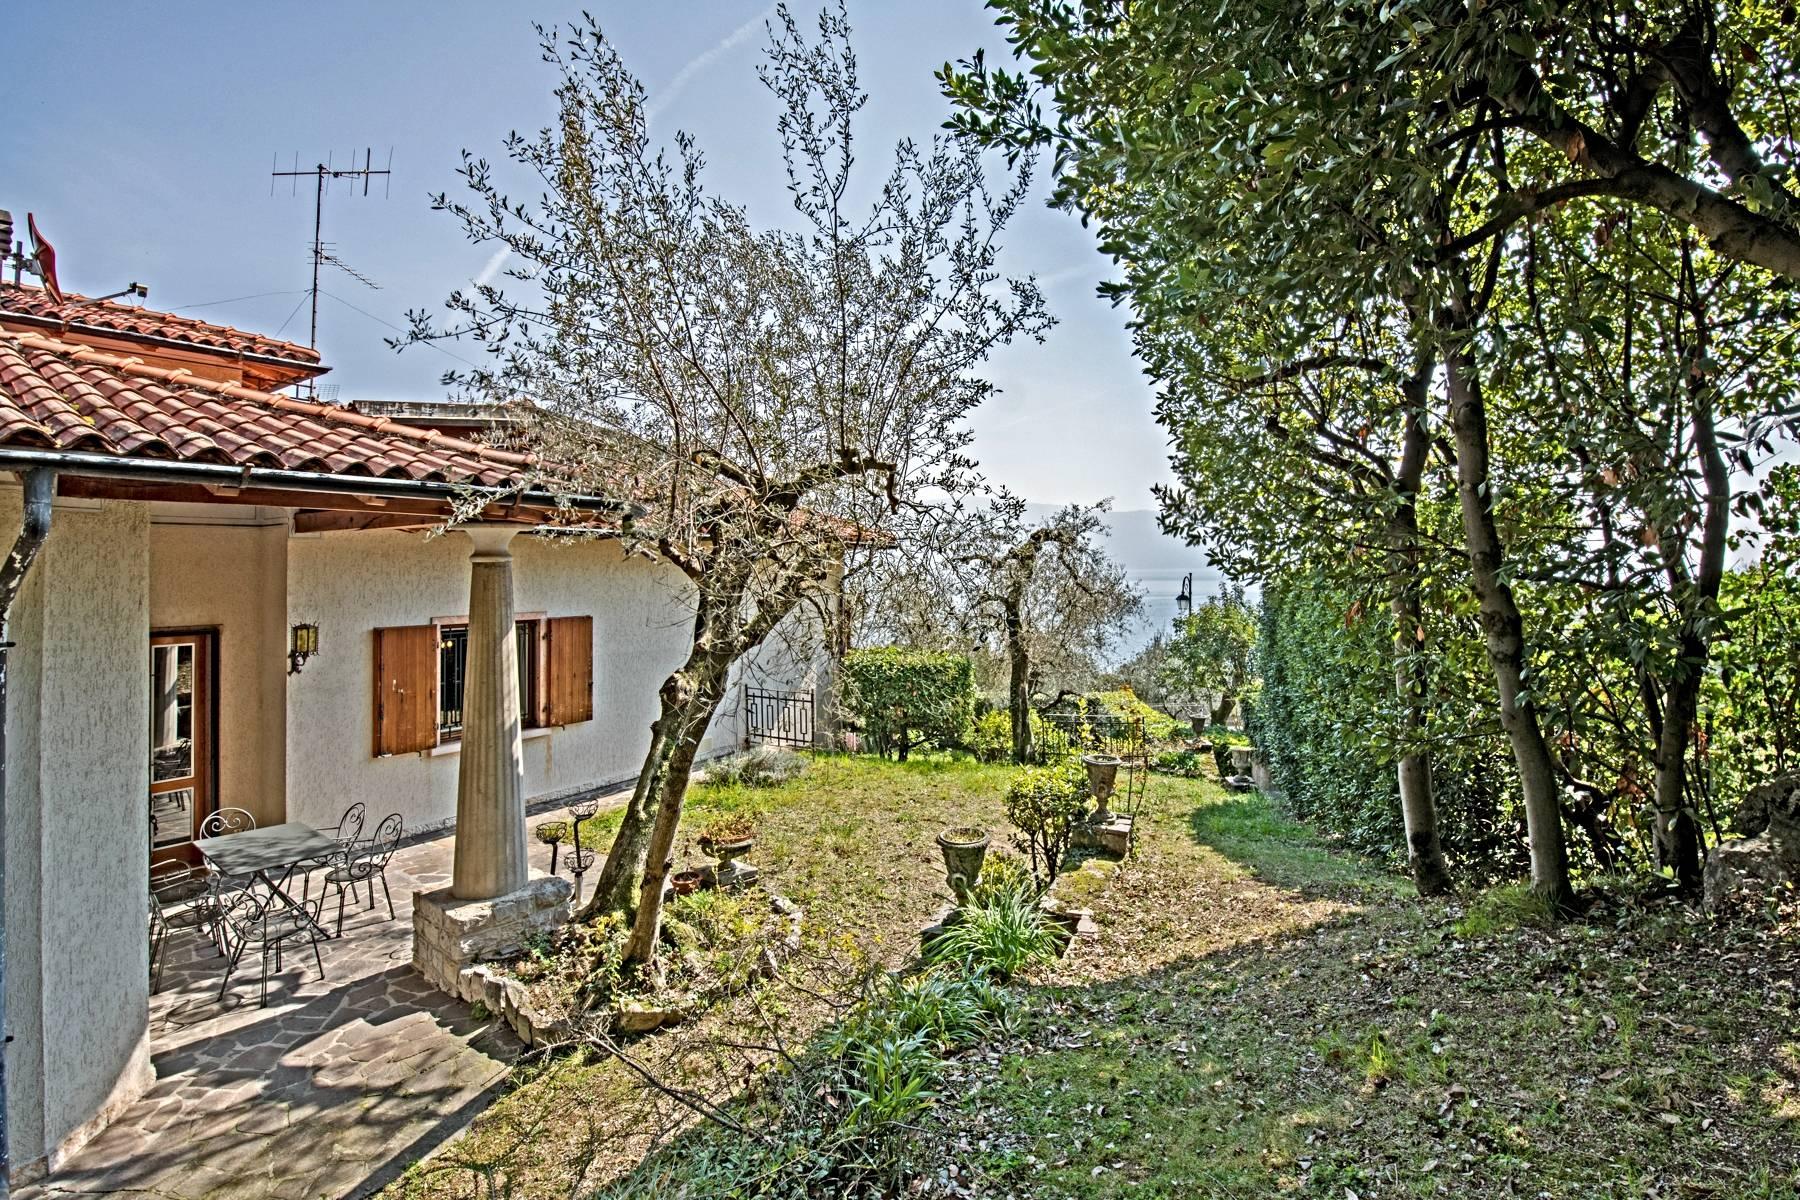 Villa with lake view in Gargnano surrounded by olive trees - 31